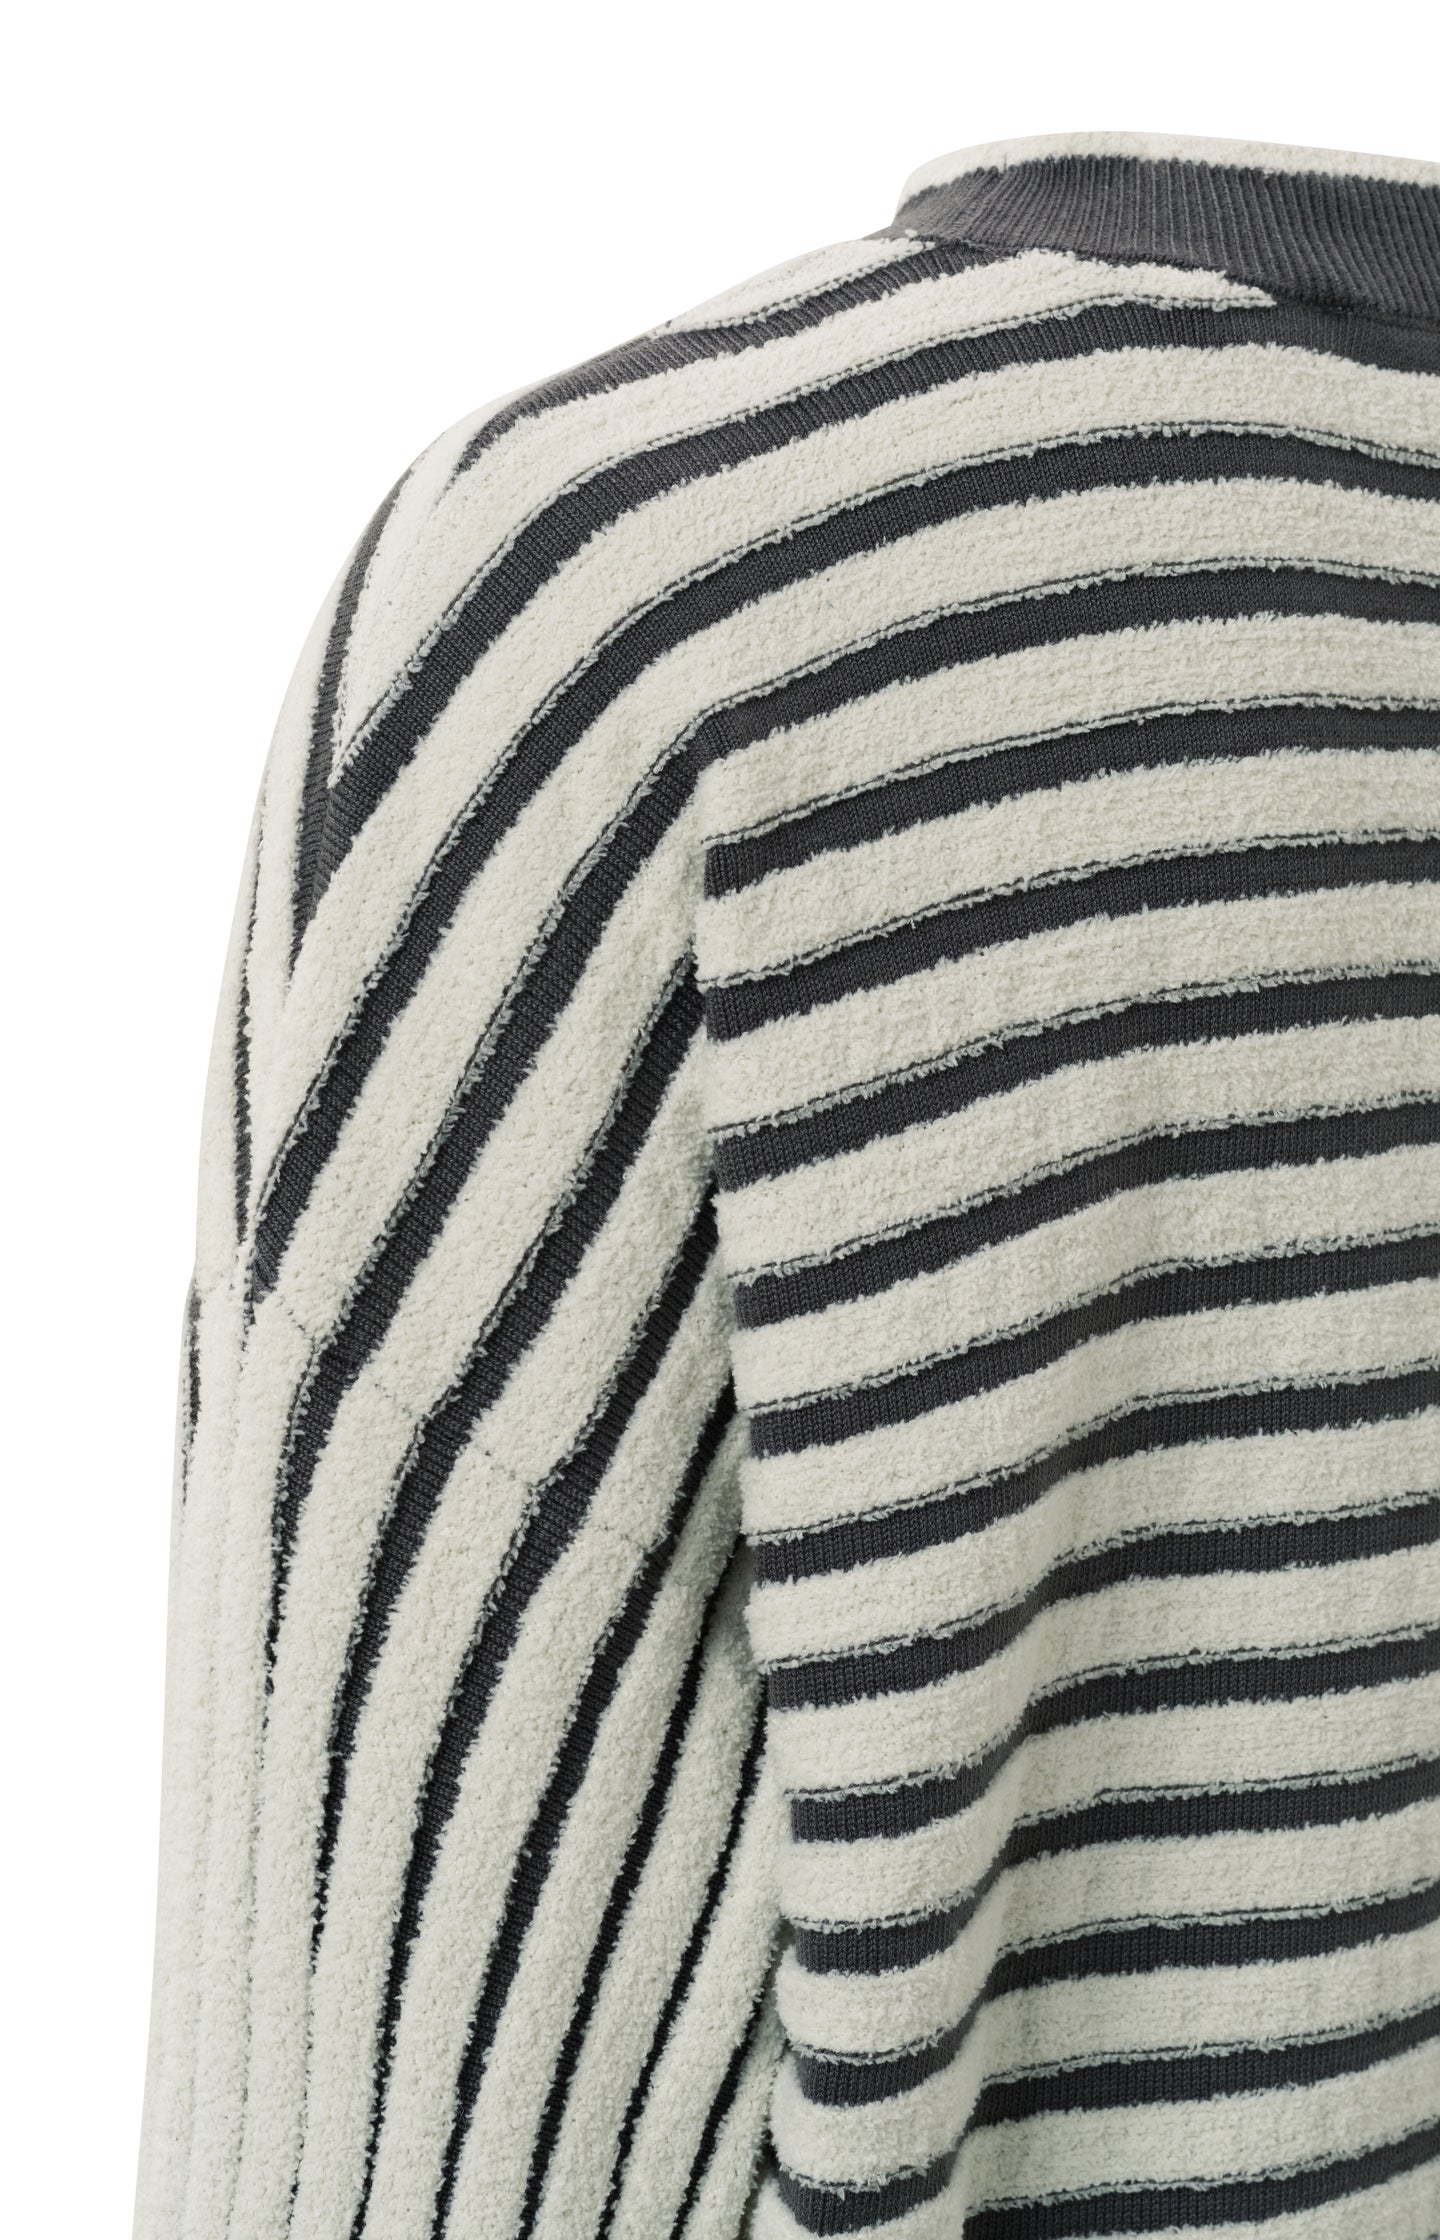 Striped sweater with crewneck, long sleeves and frayed seams